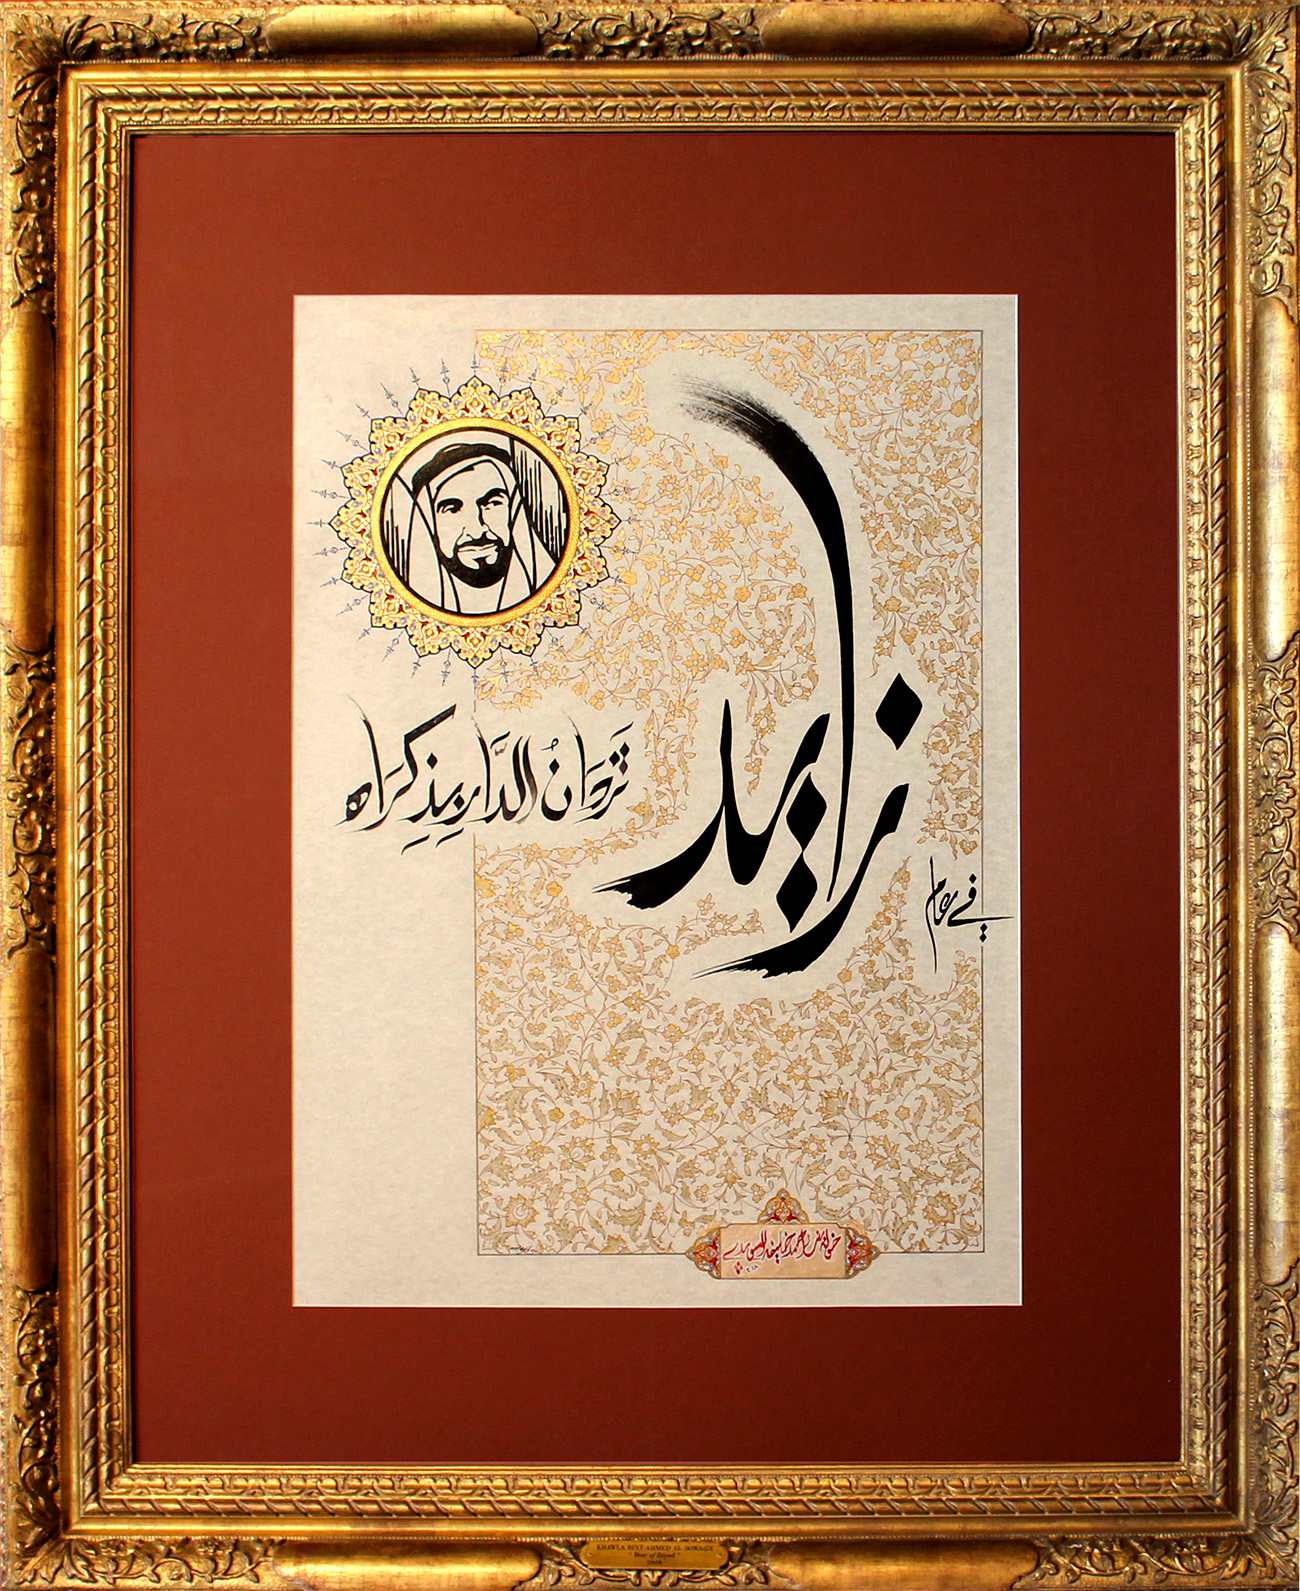 <p>
	Year of Zayed</p>
<p>
	Zayed, who adorns the nation with his memory.</p>
 